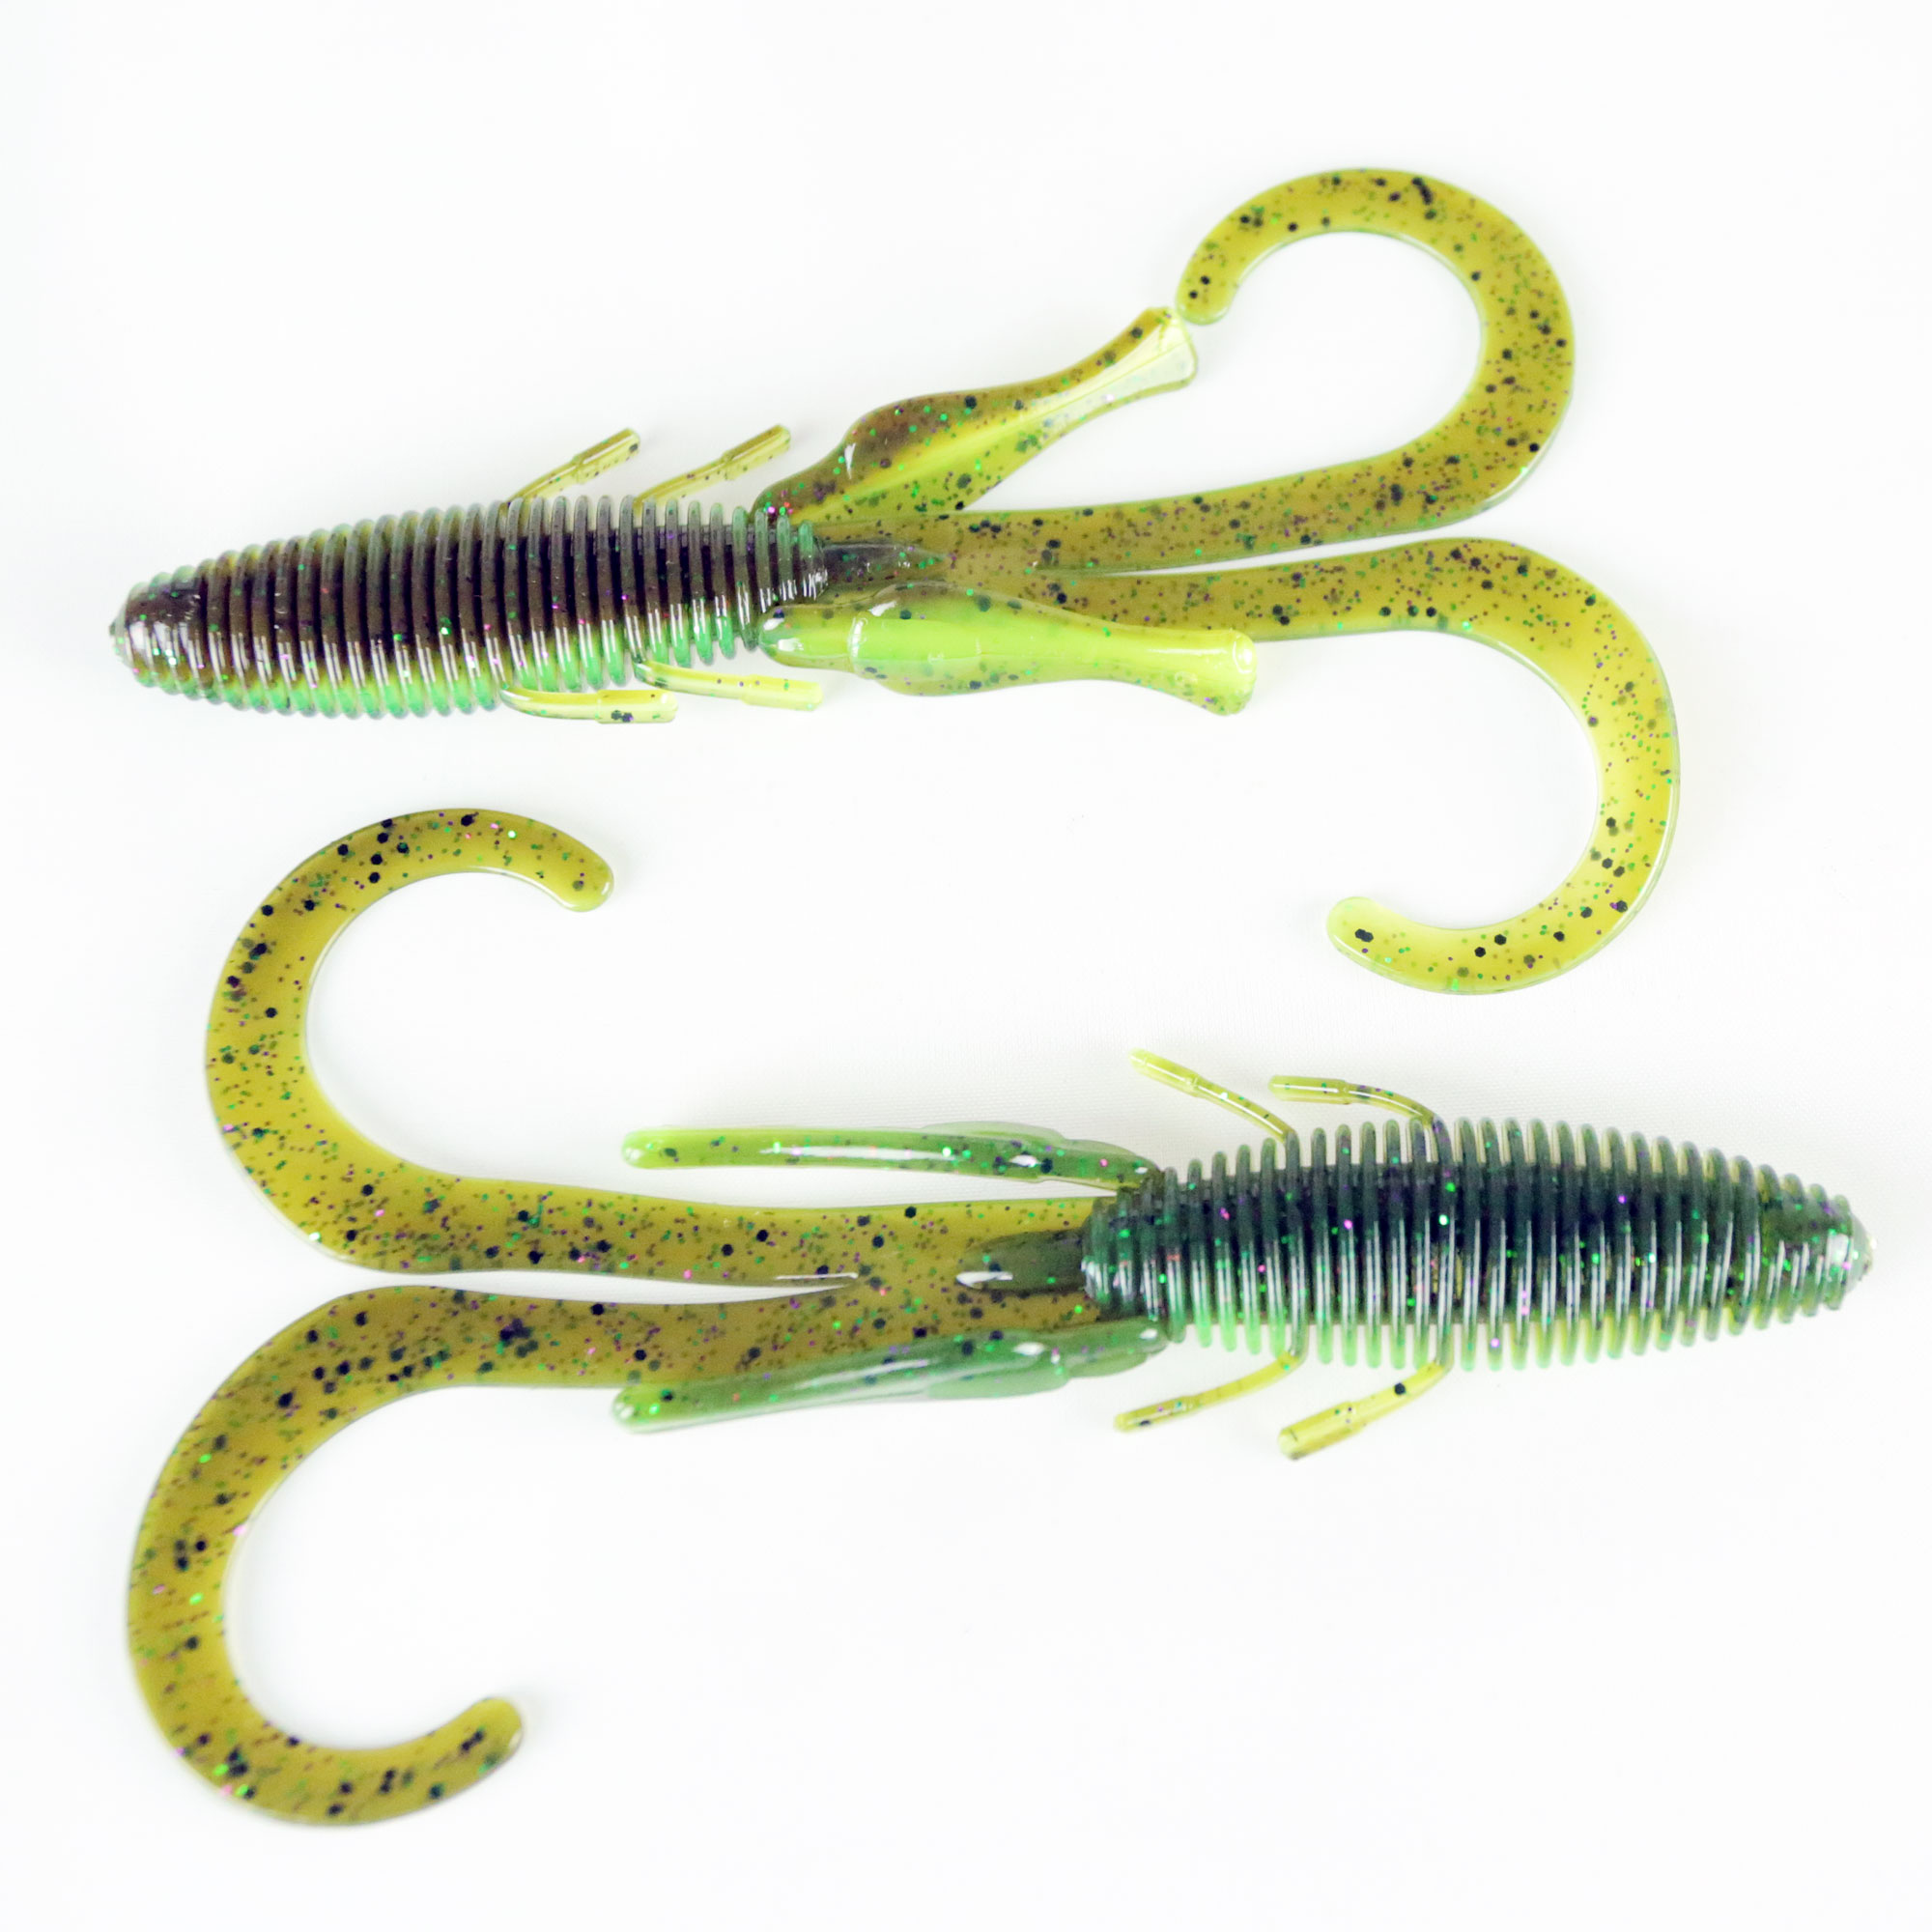 Missile Baits D Stroyer Creature MBDS70-CNGR Candy Grass 